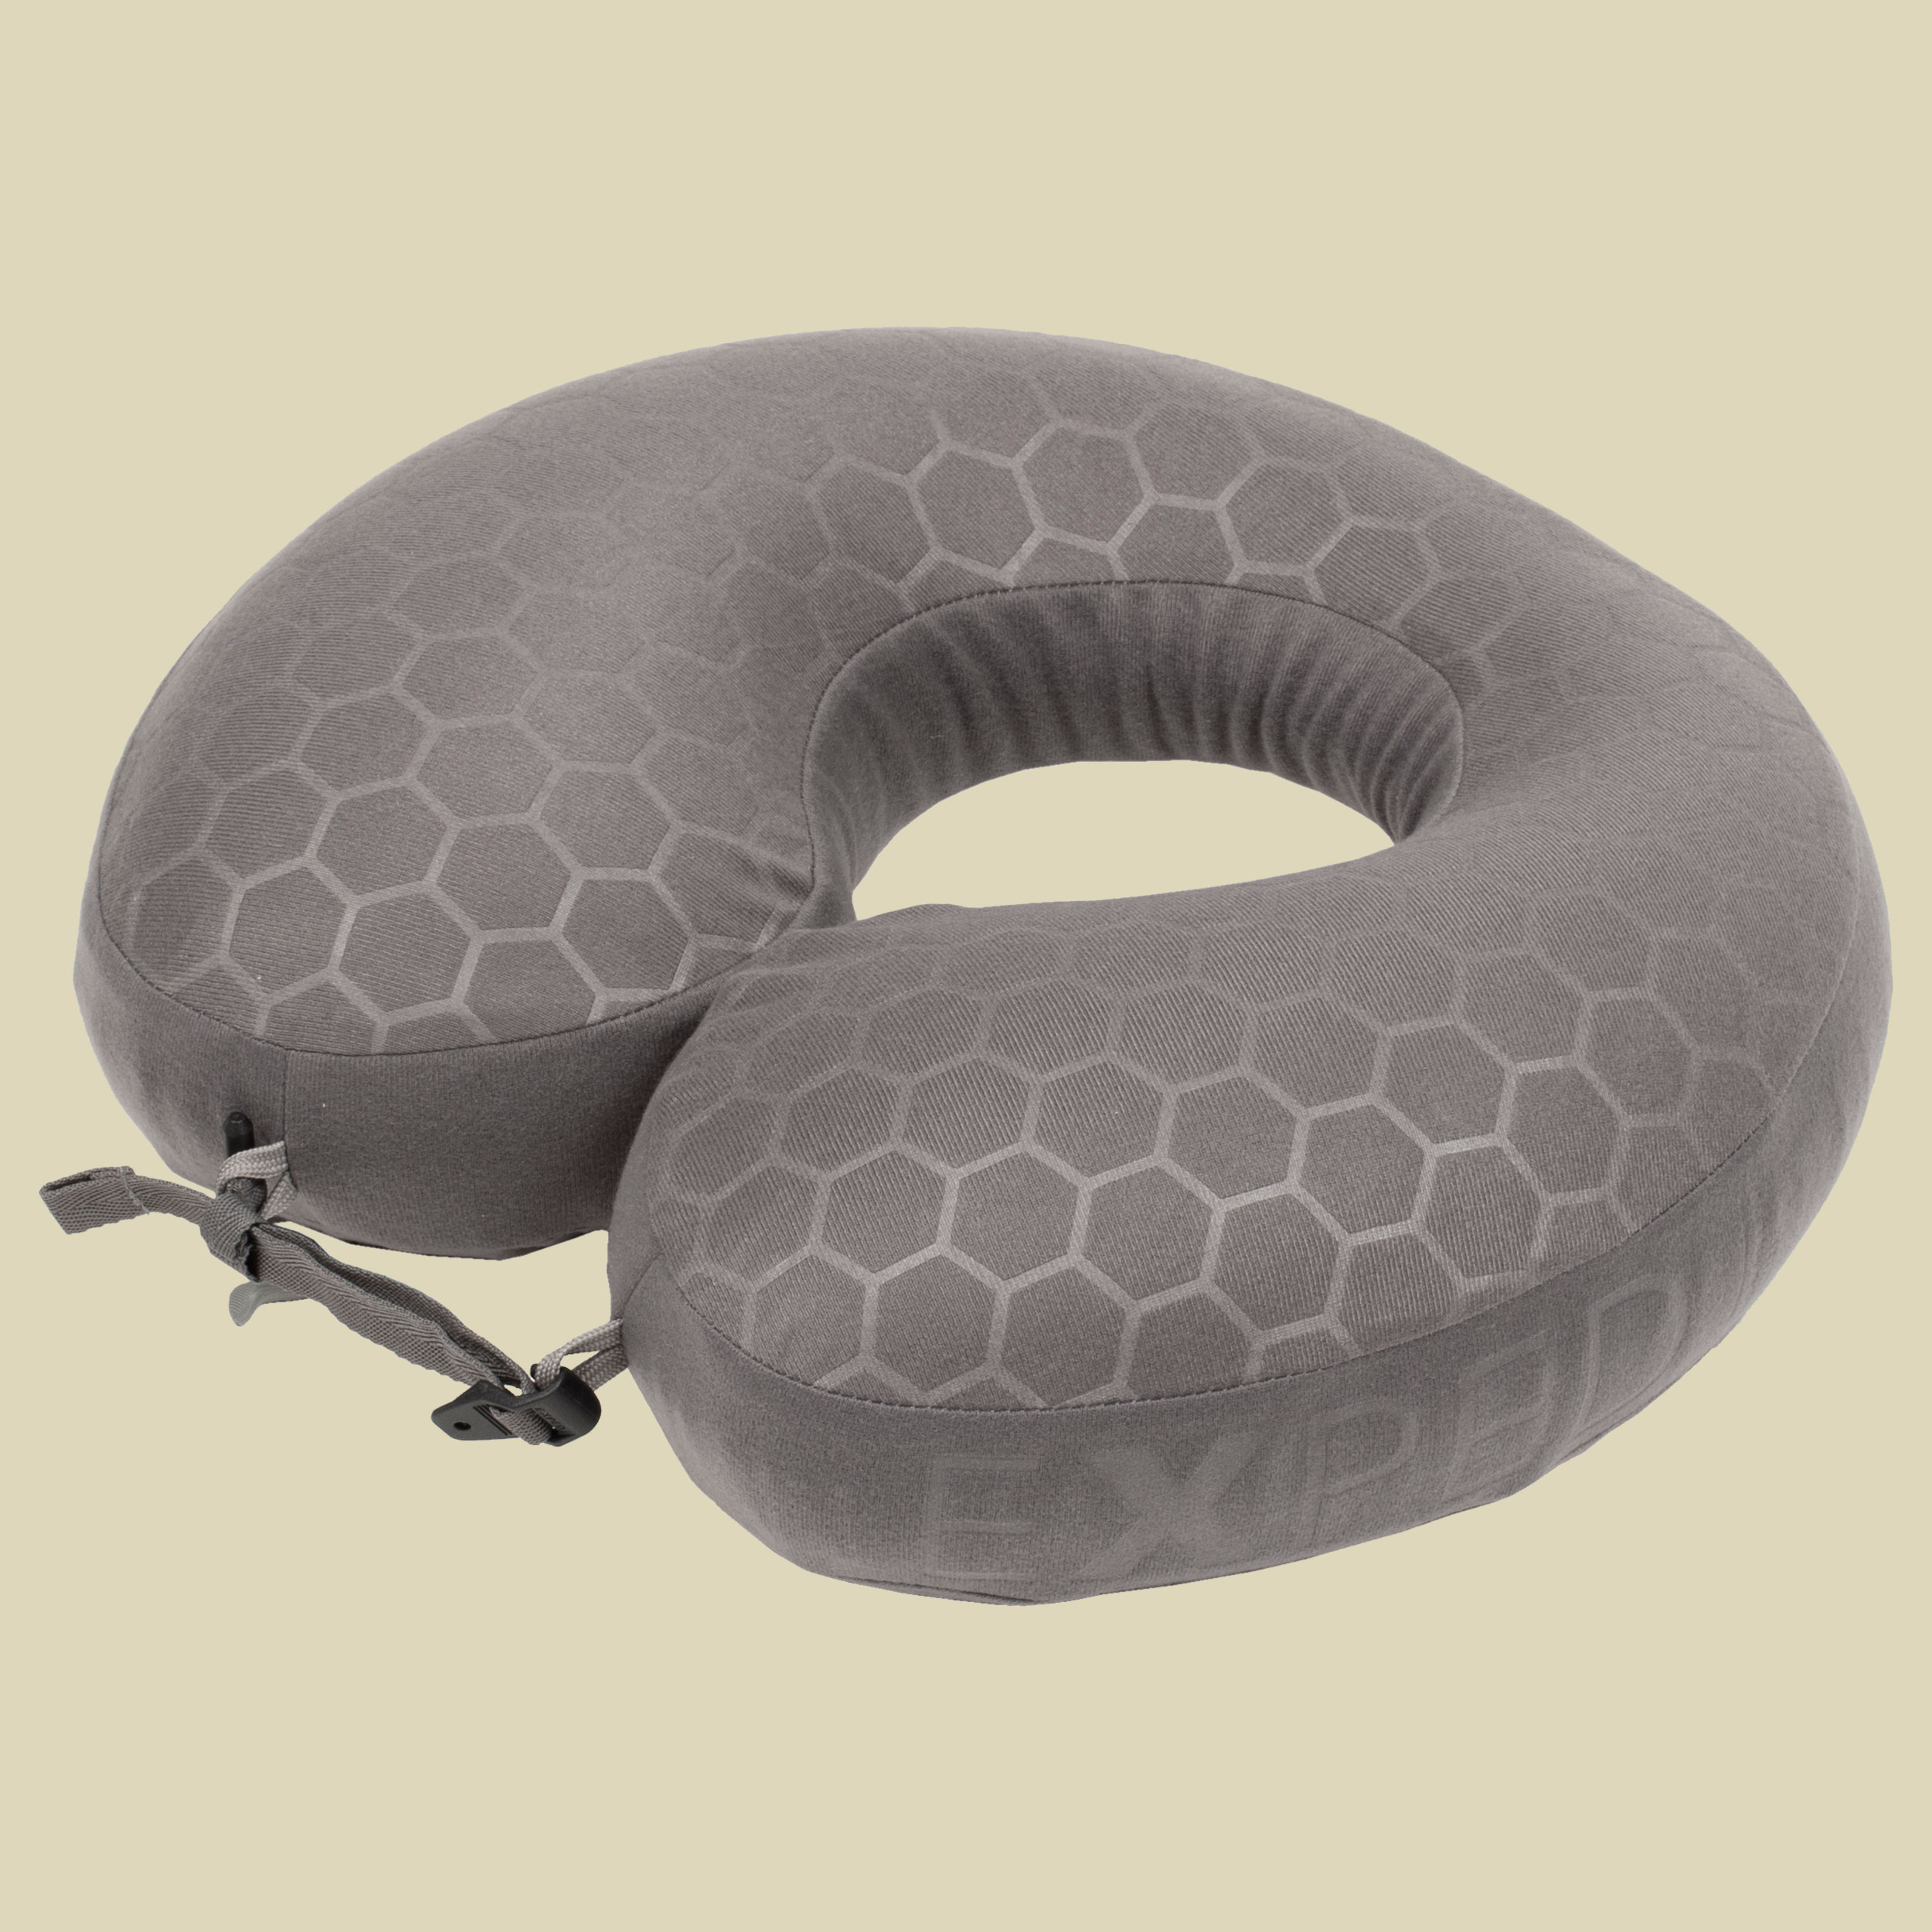 Neck Pillow Deluxe Größe one size Farbe granite grey